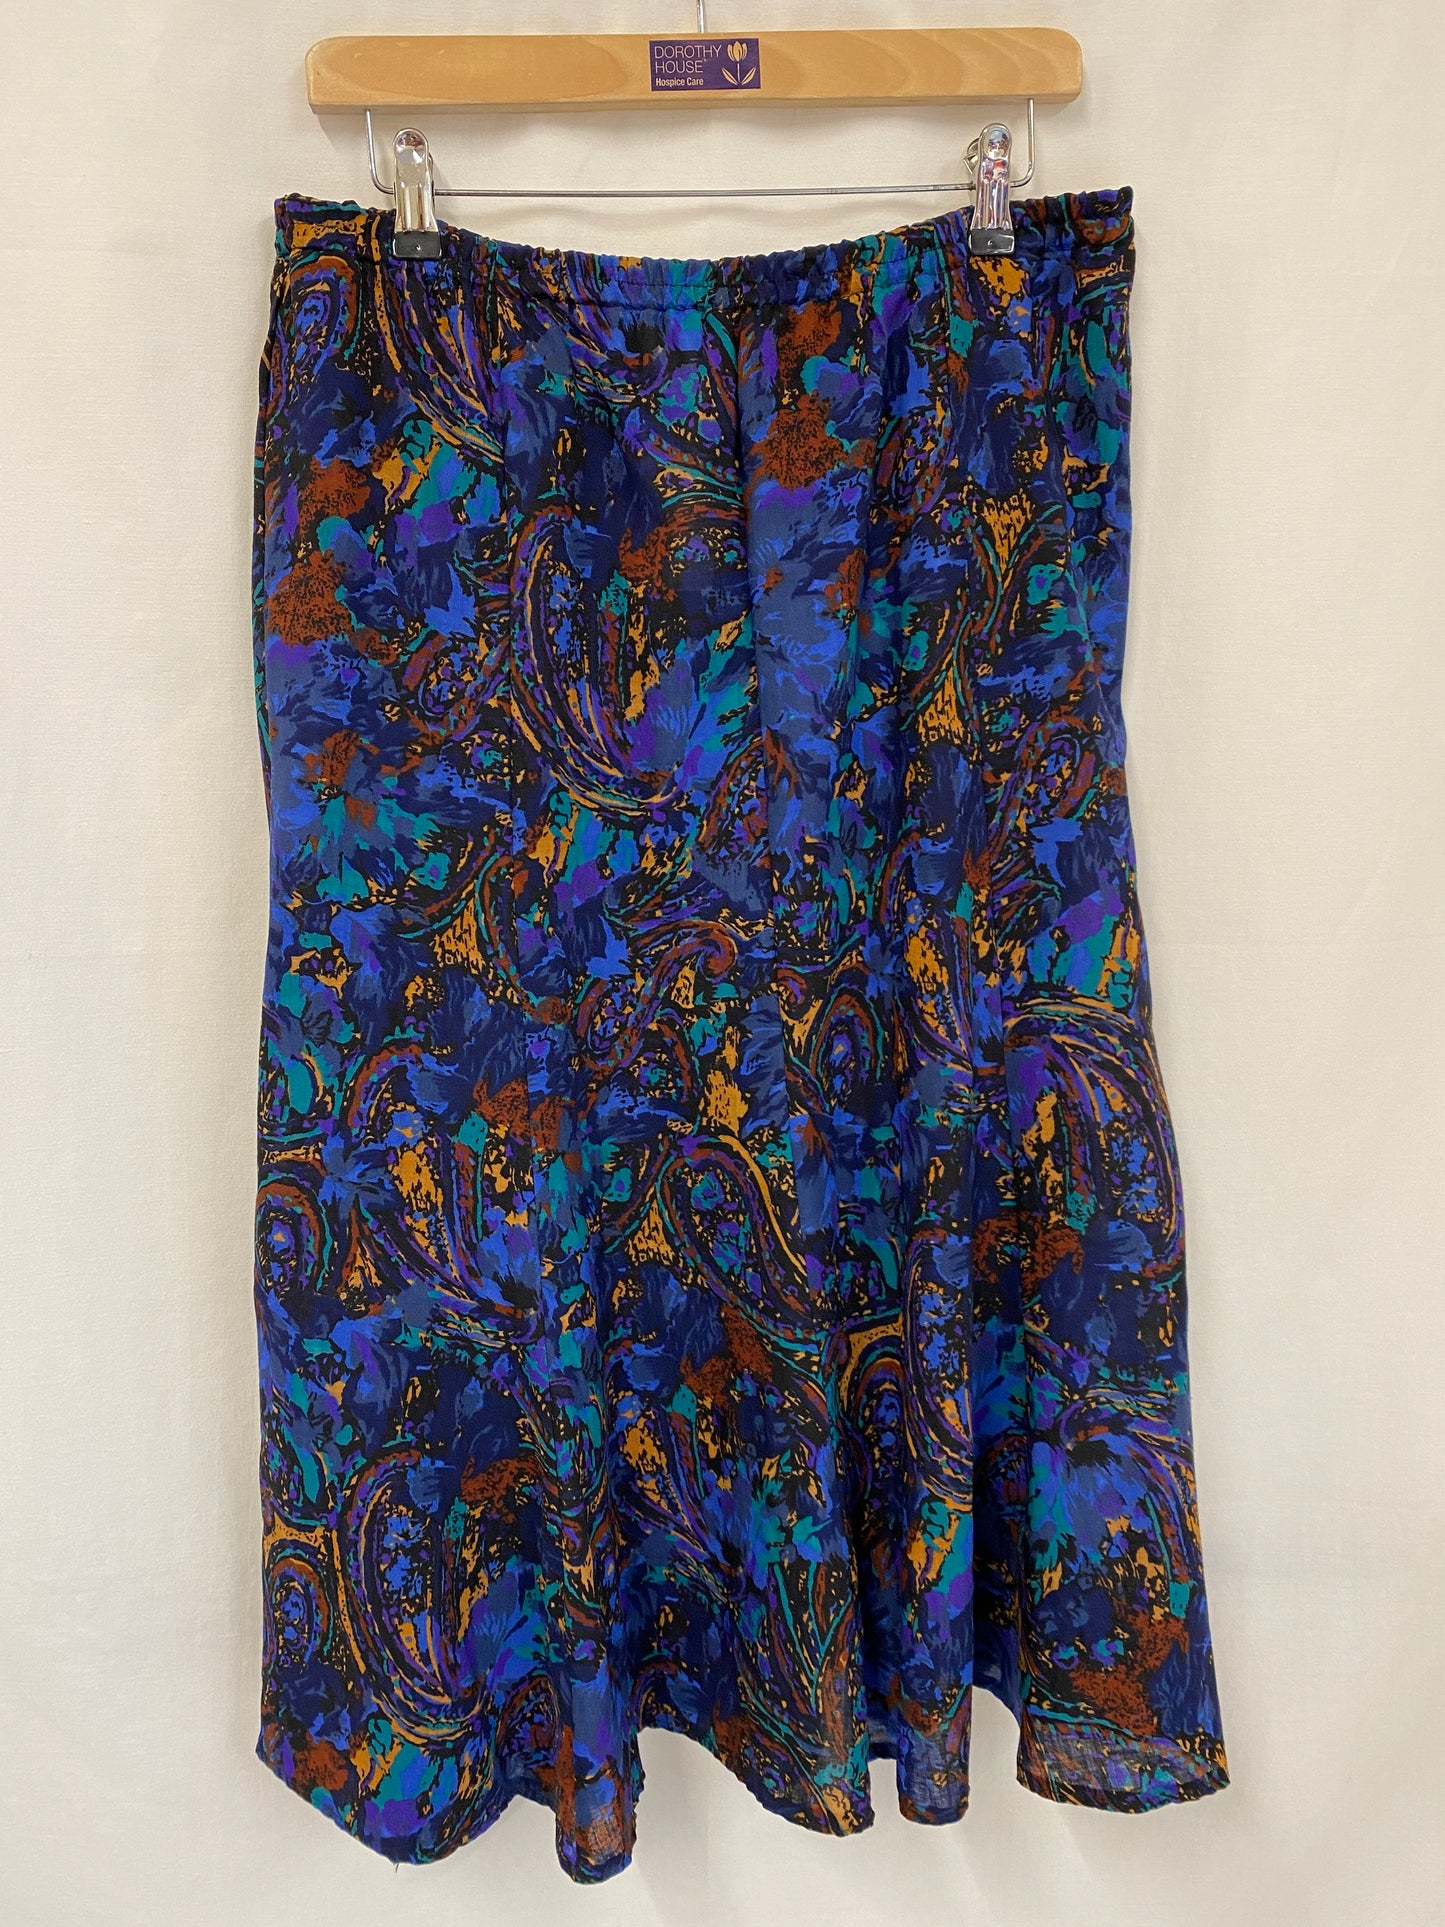 Vintage Blue Abstract Patterned Skirt Size 16